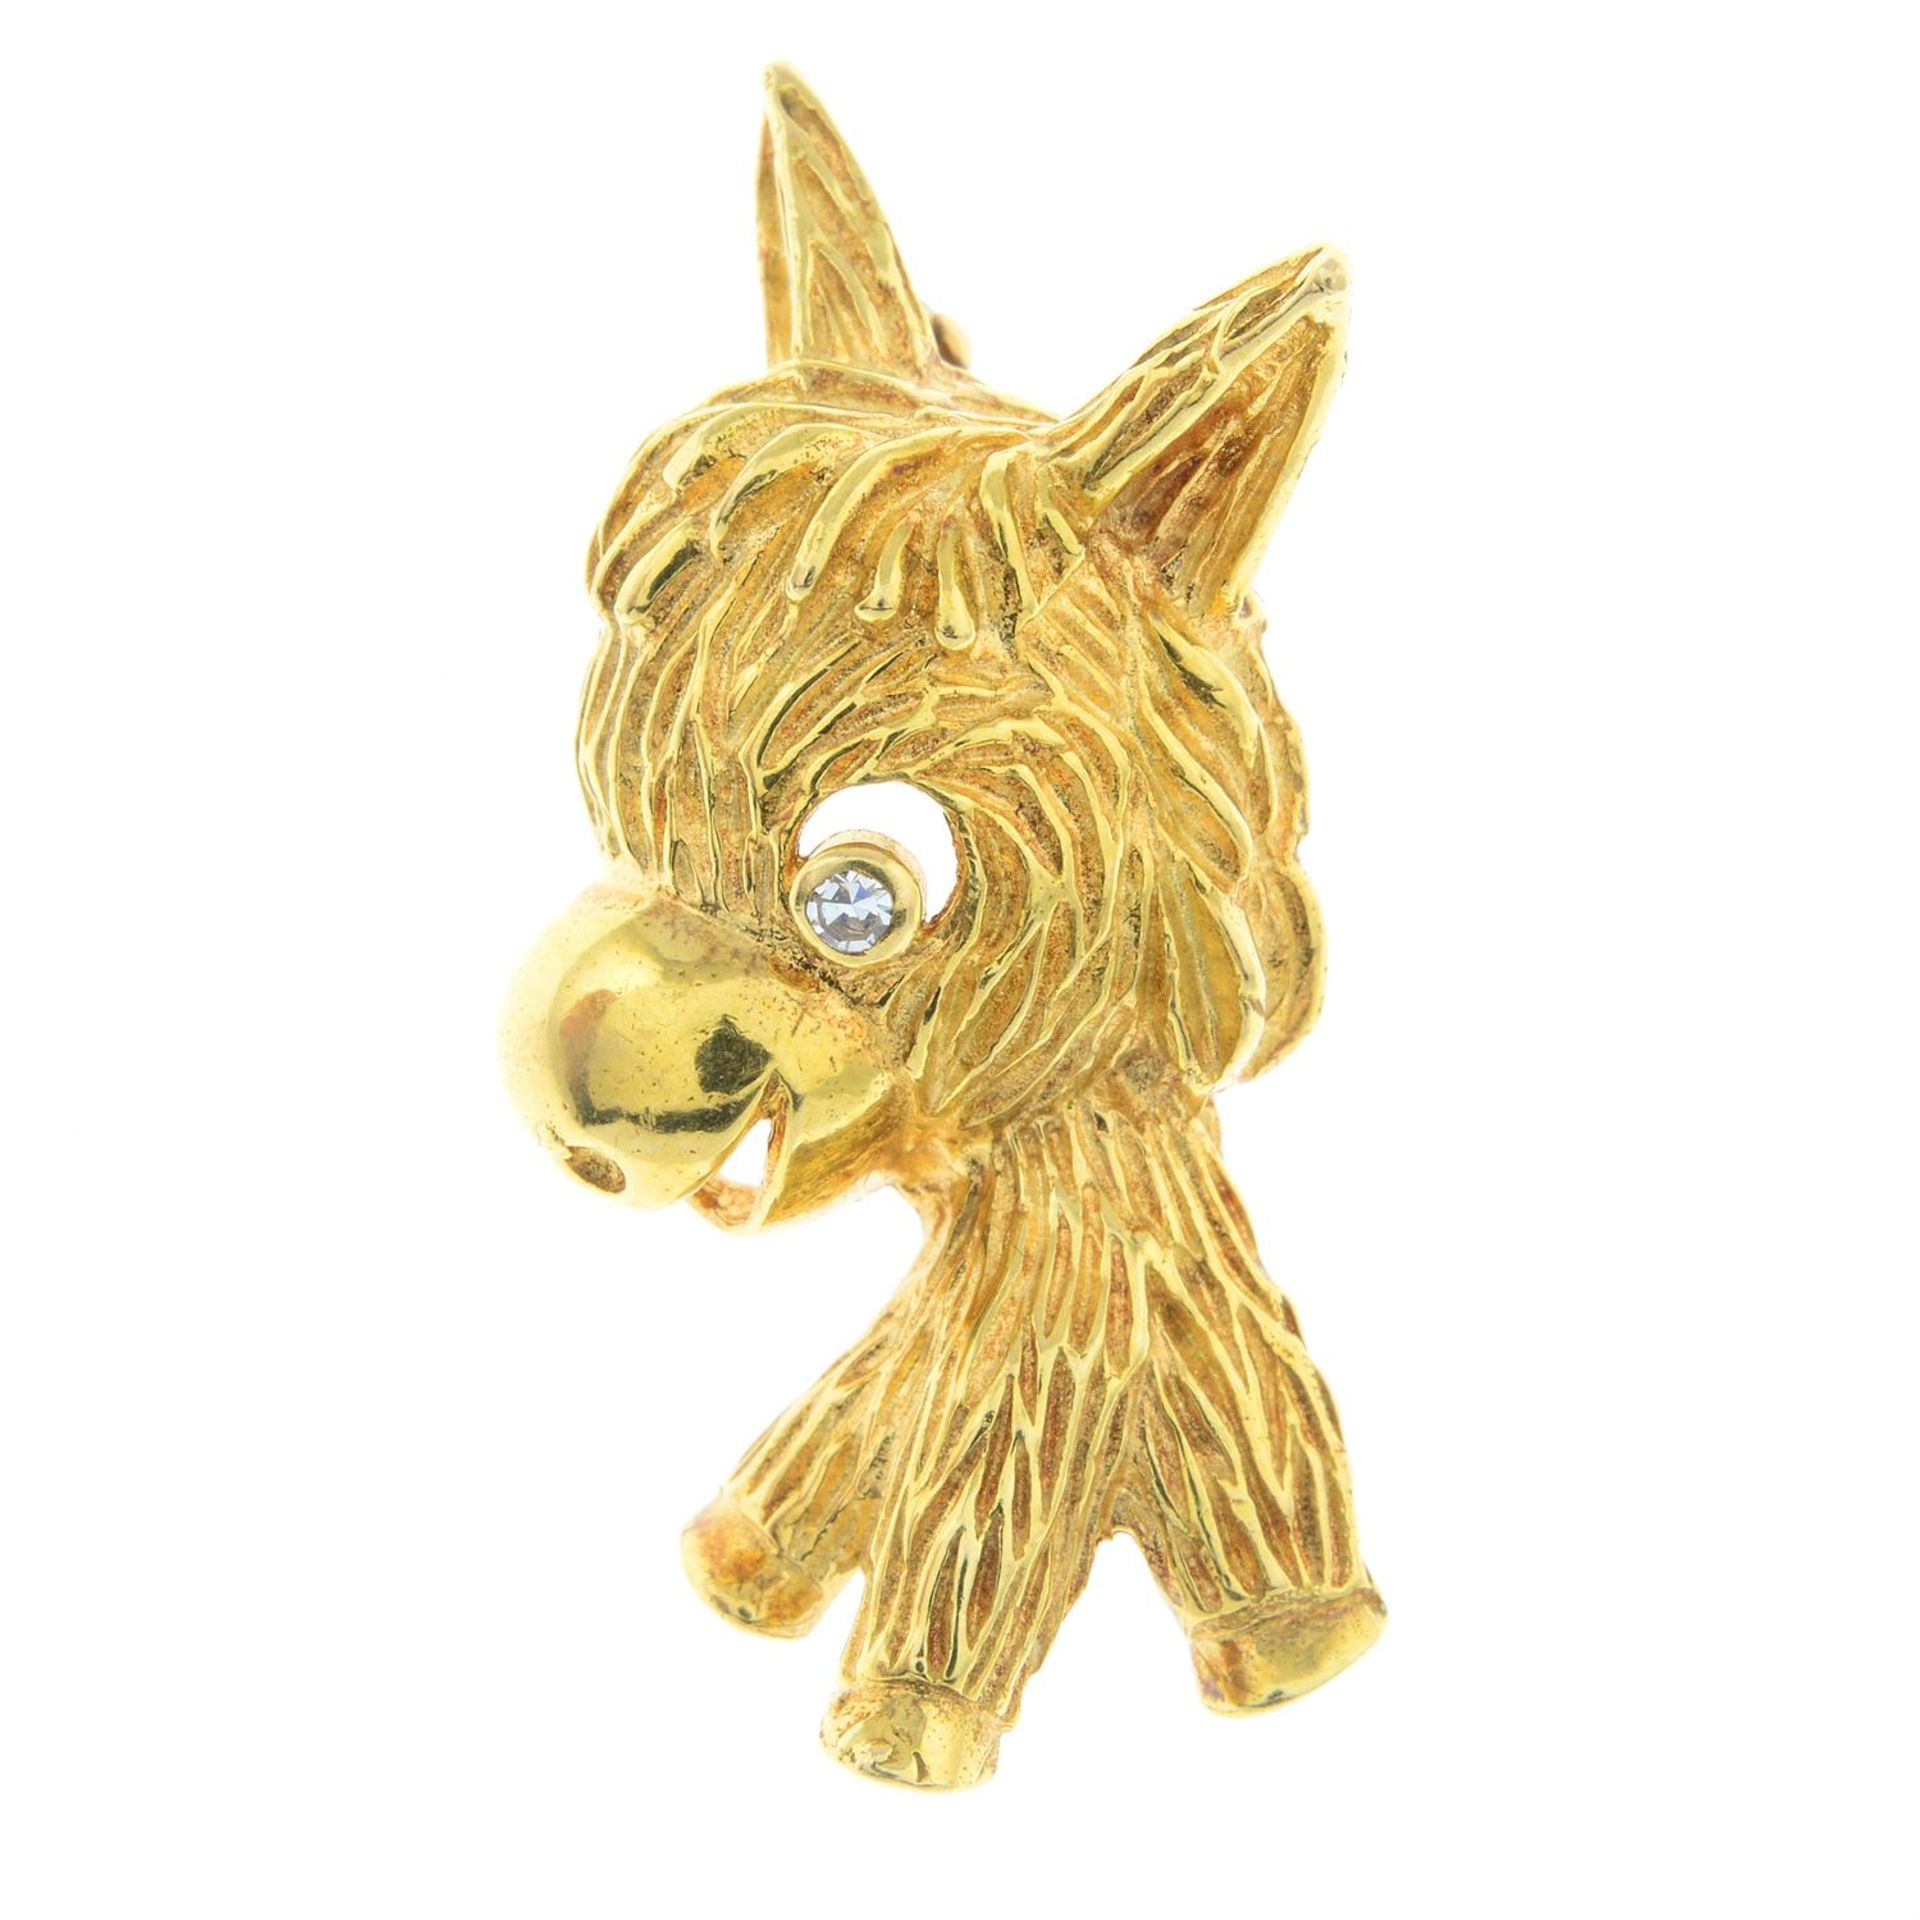 A textured donkey brooch, with diamond eye detail.